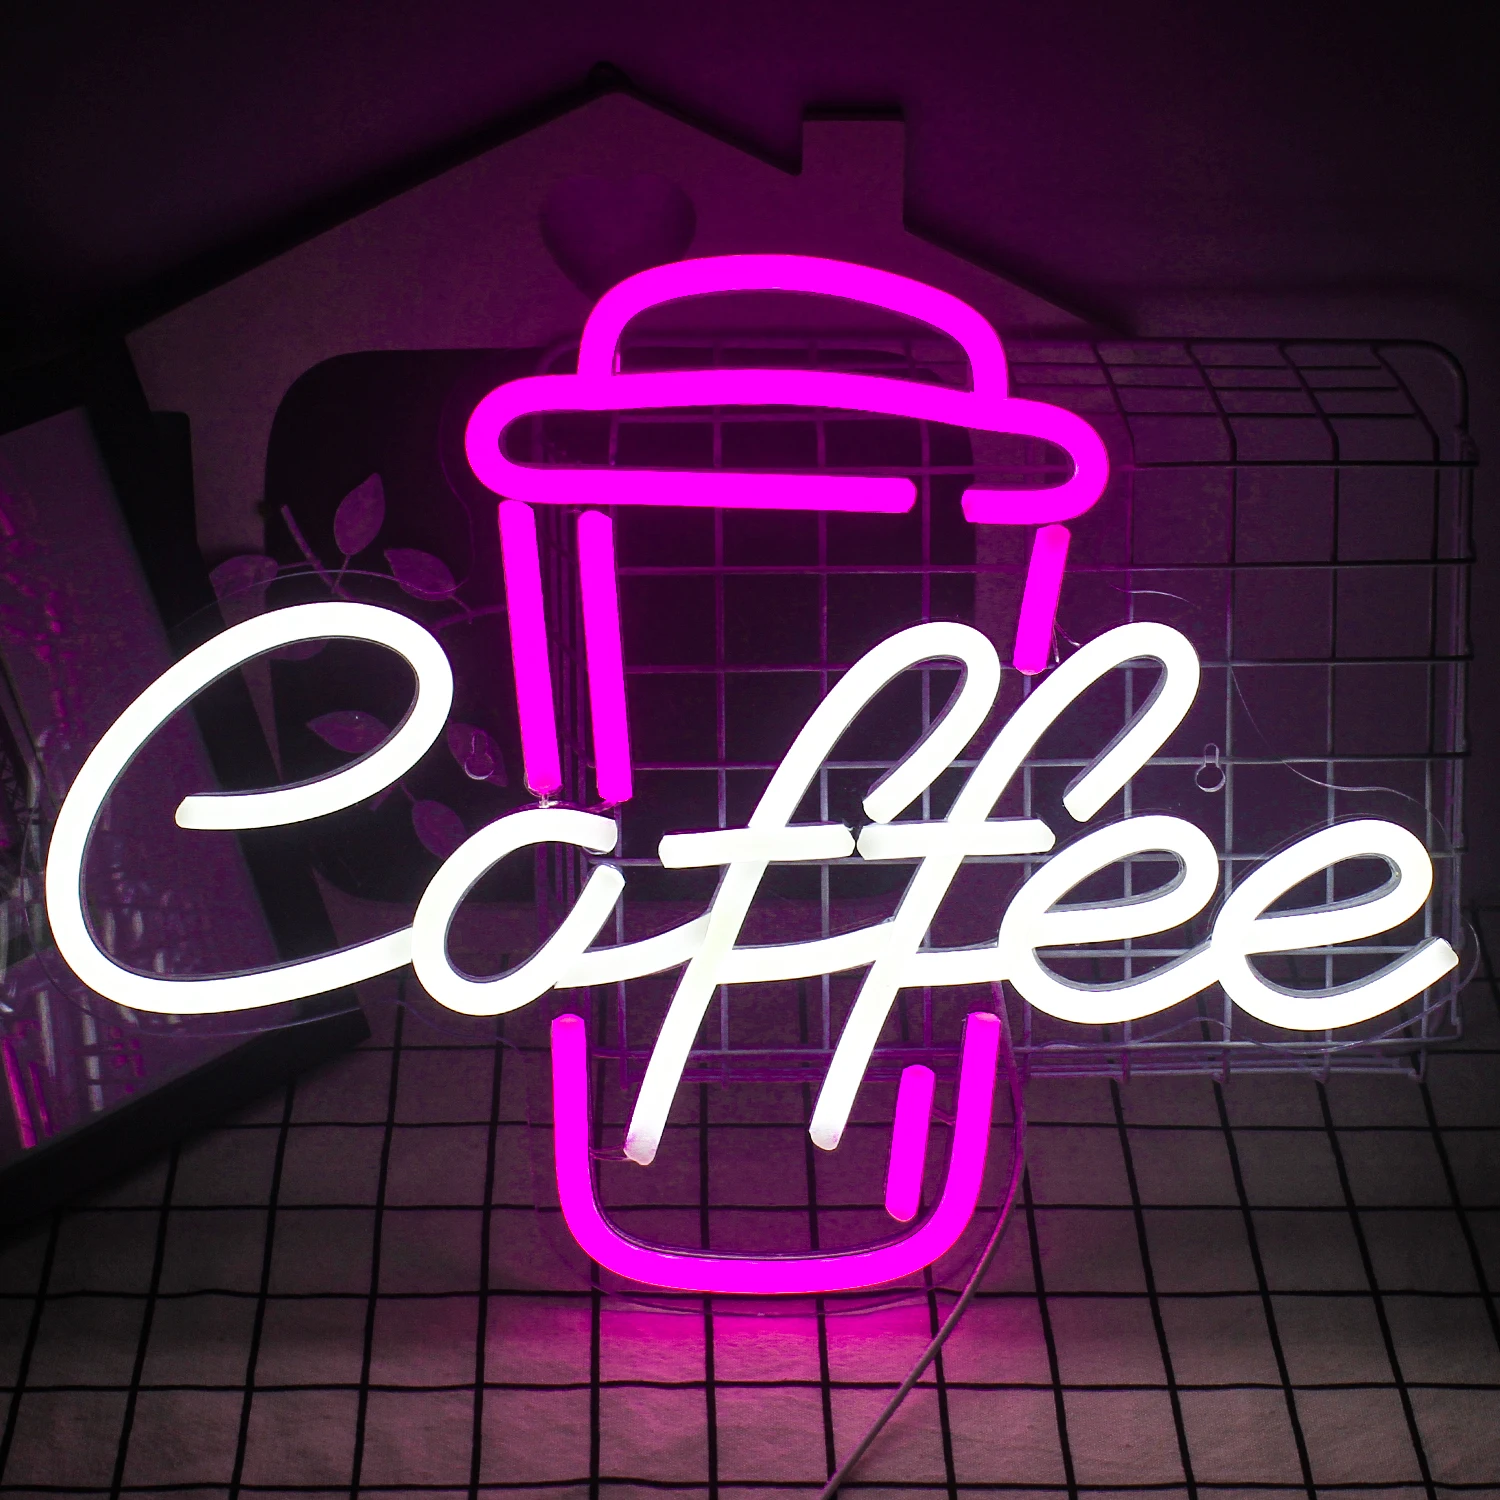 

Coffee Cup Neon Led Sign Luminous Signs For Cafe Shop Bar USB Letter Neon Wall Lamp Room Decor Birthday Party Bedroom Decoration